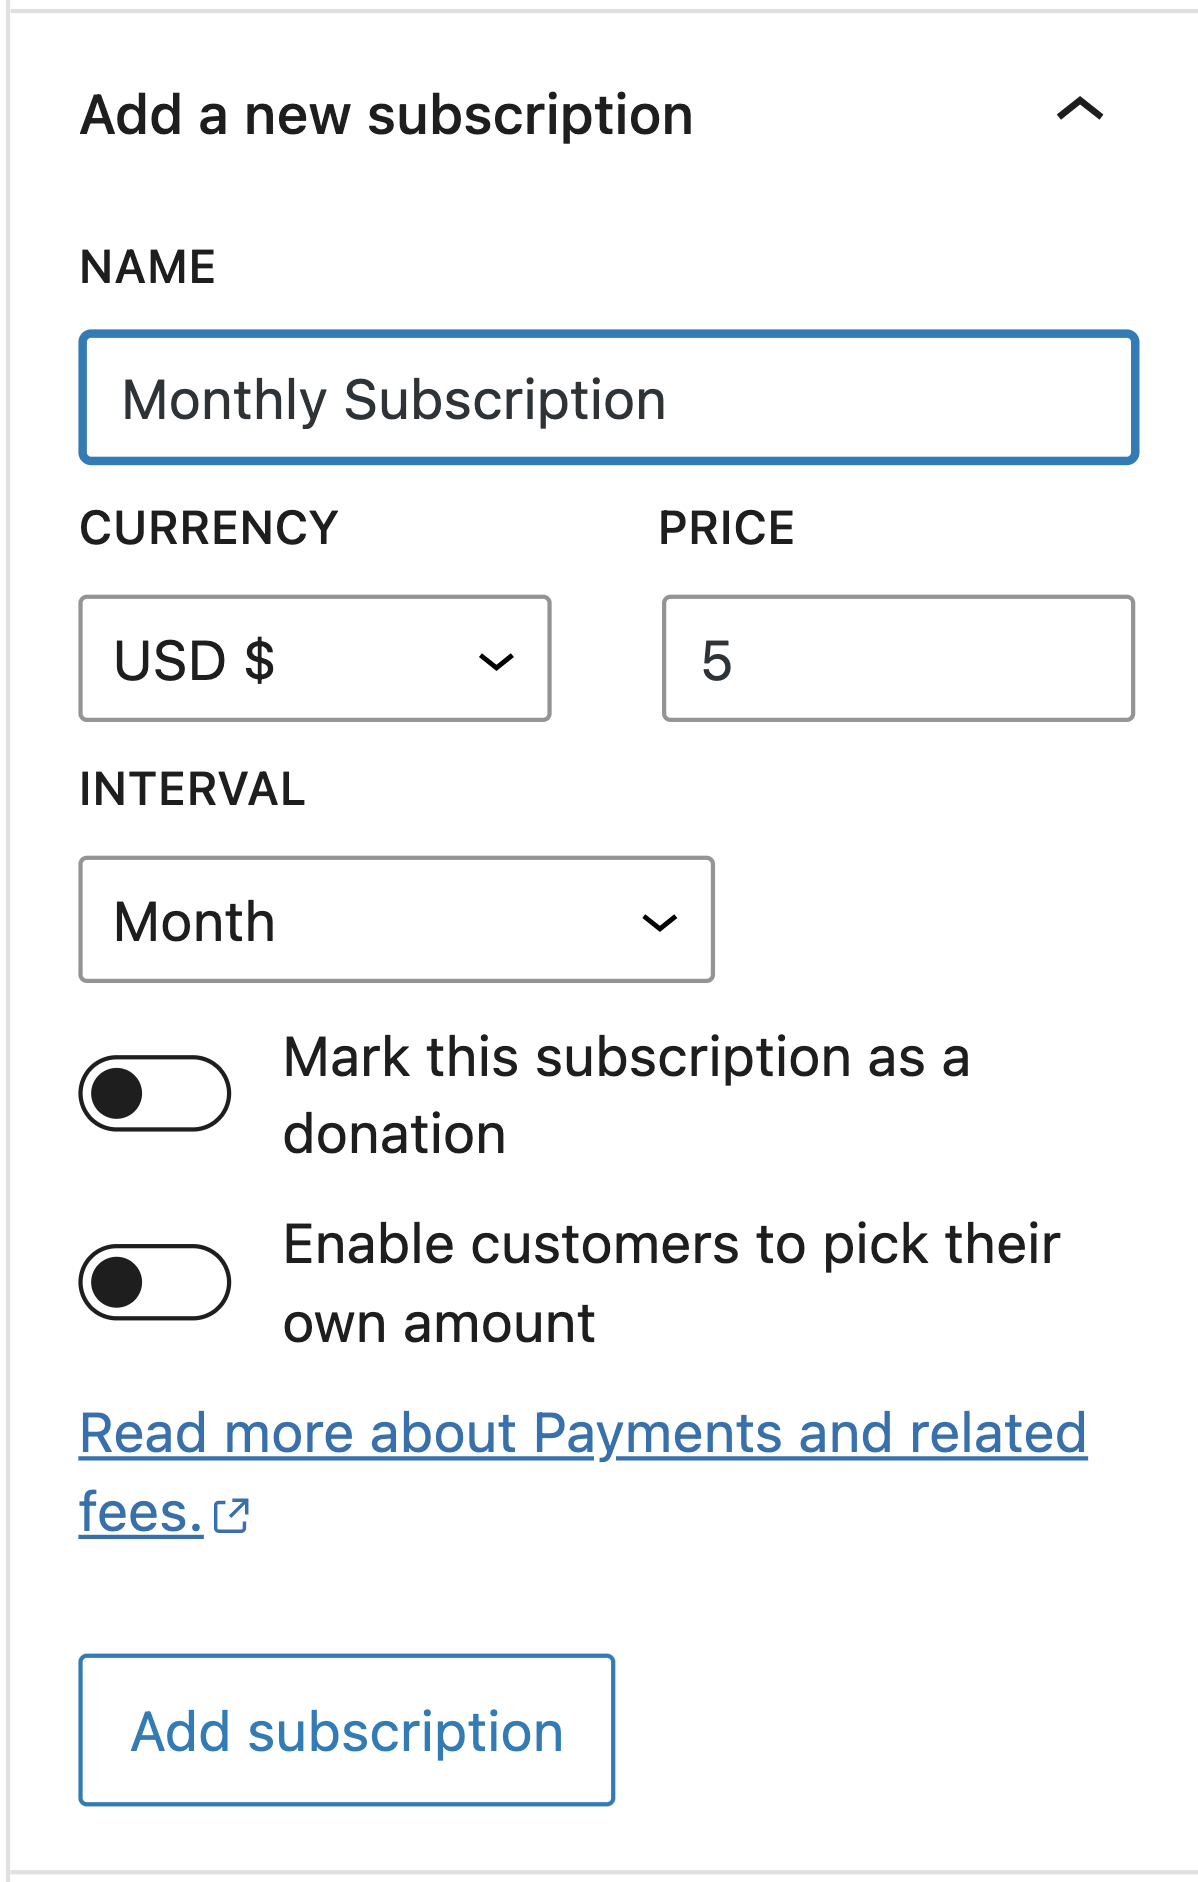 Form for adding a new subscription